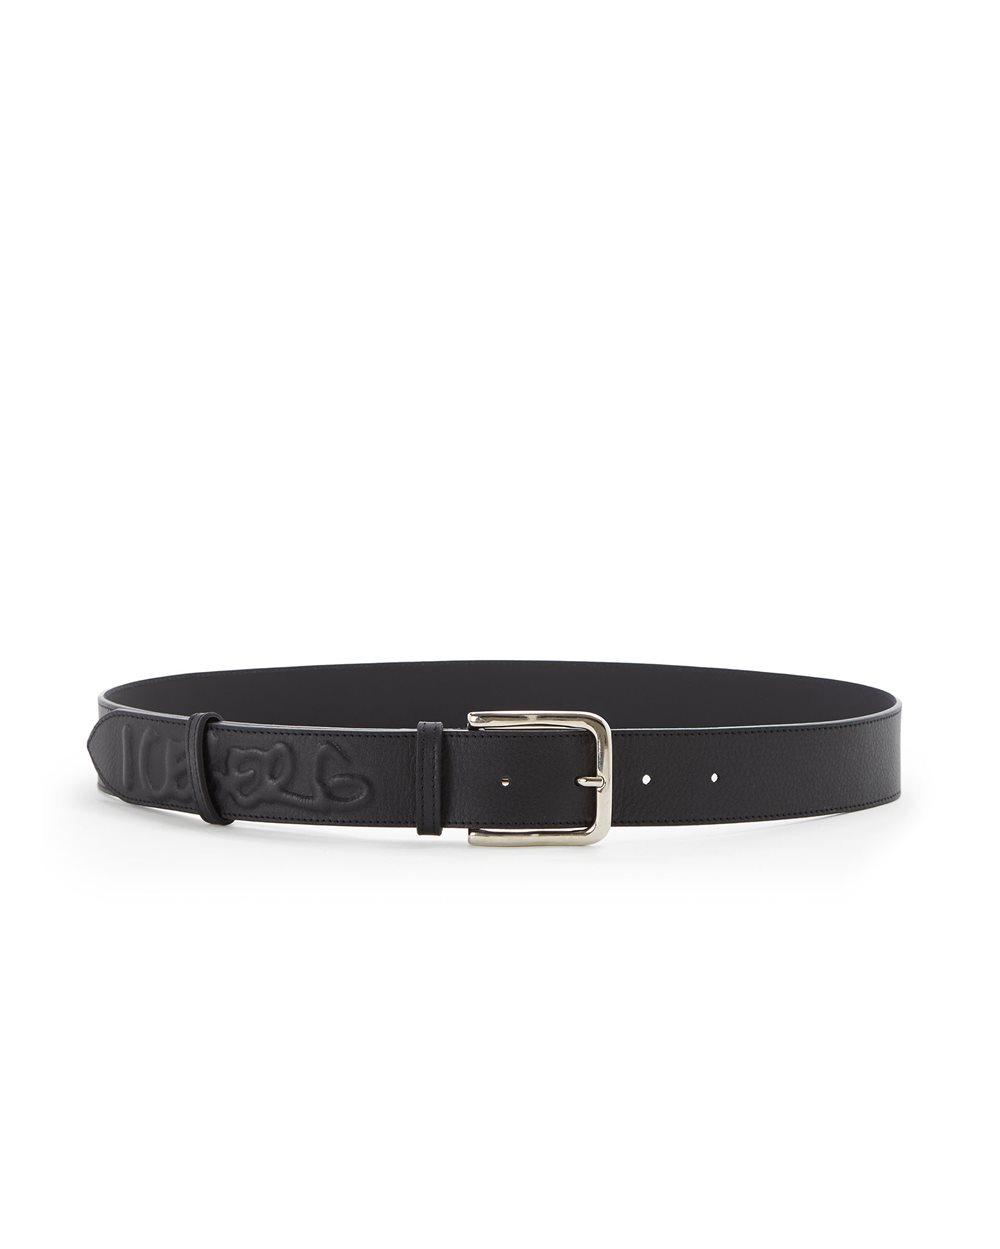 Leather belt with buckle and logo - Accessories | Iceberg - Official Website